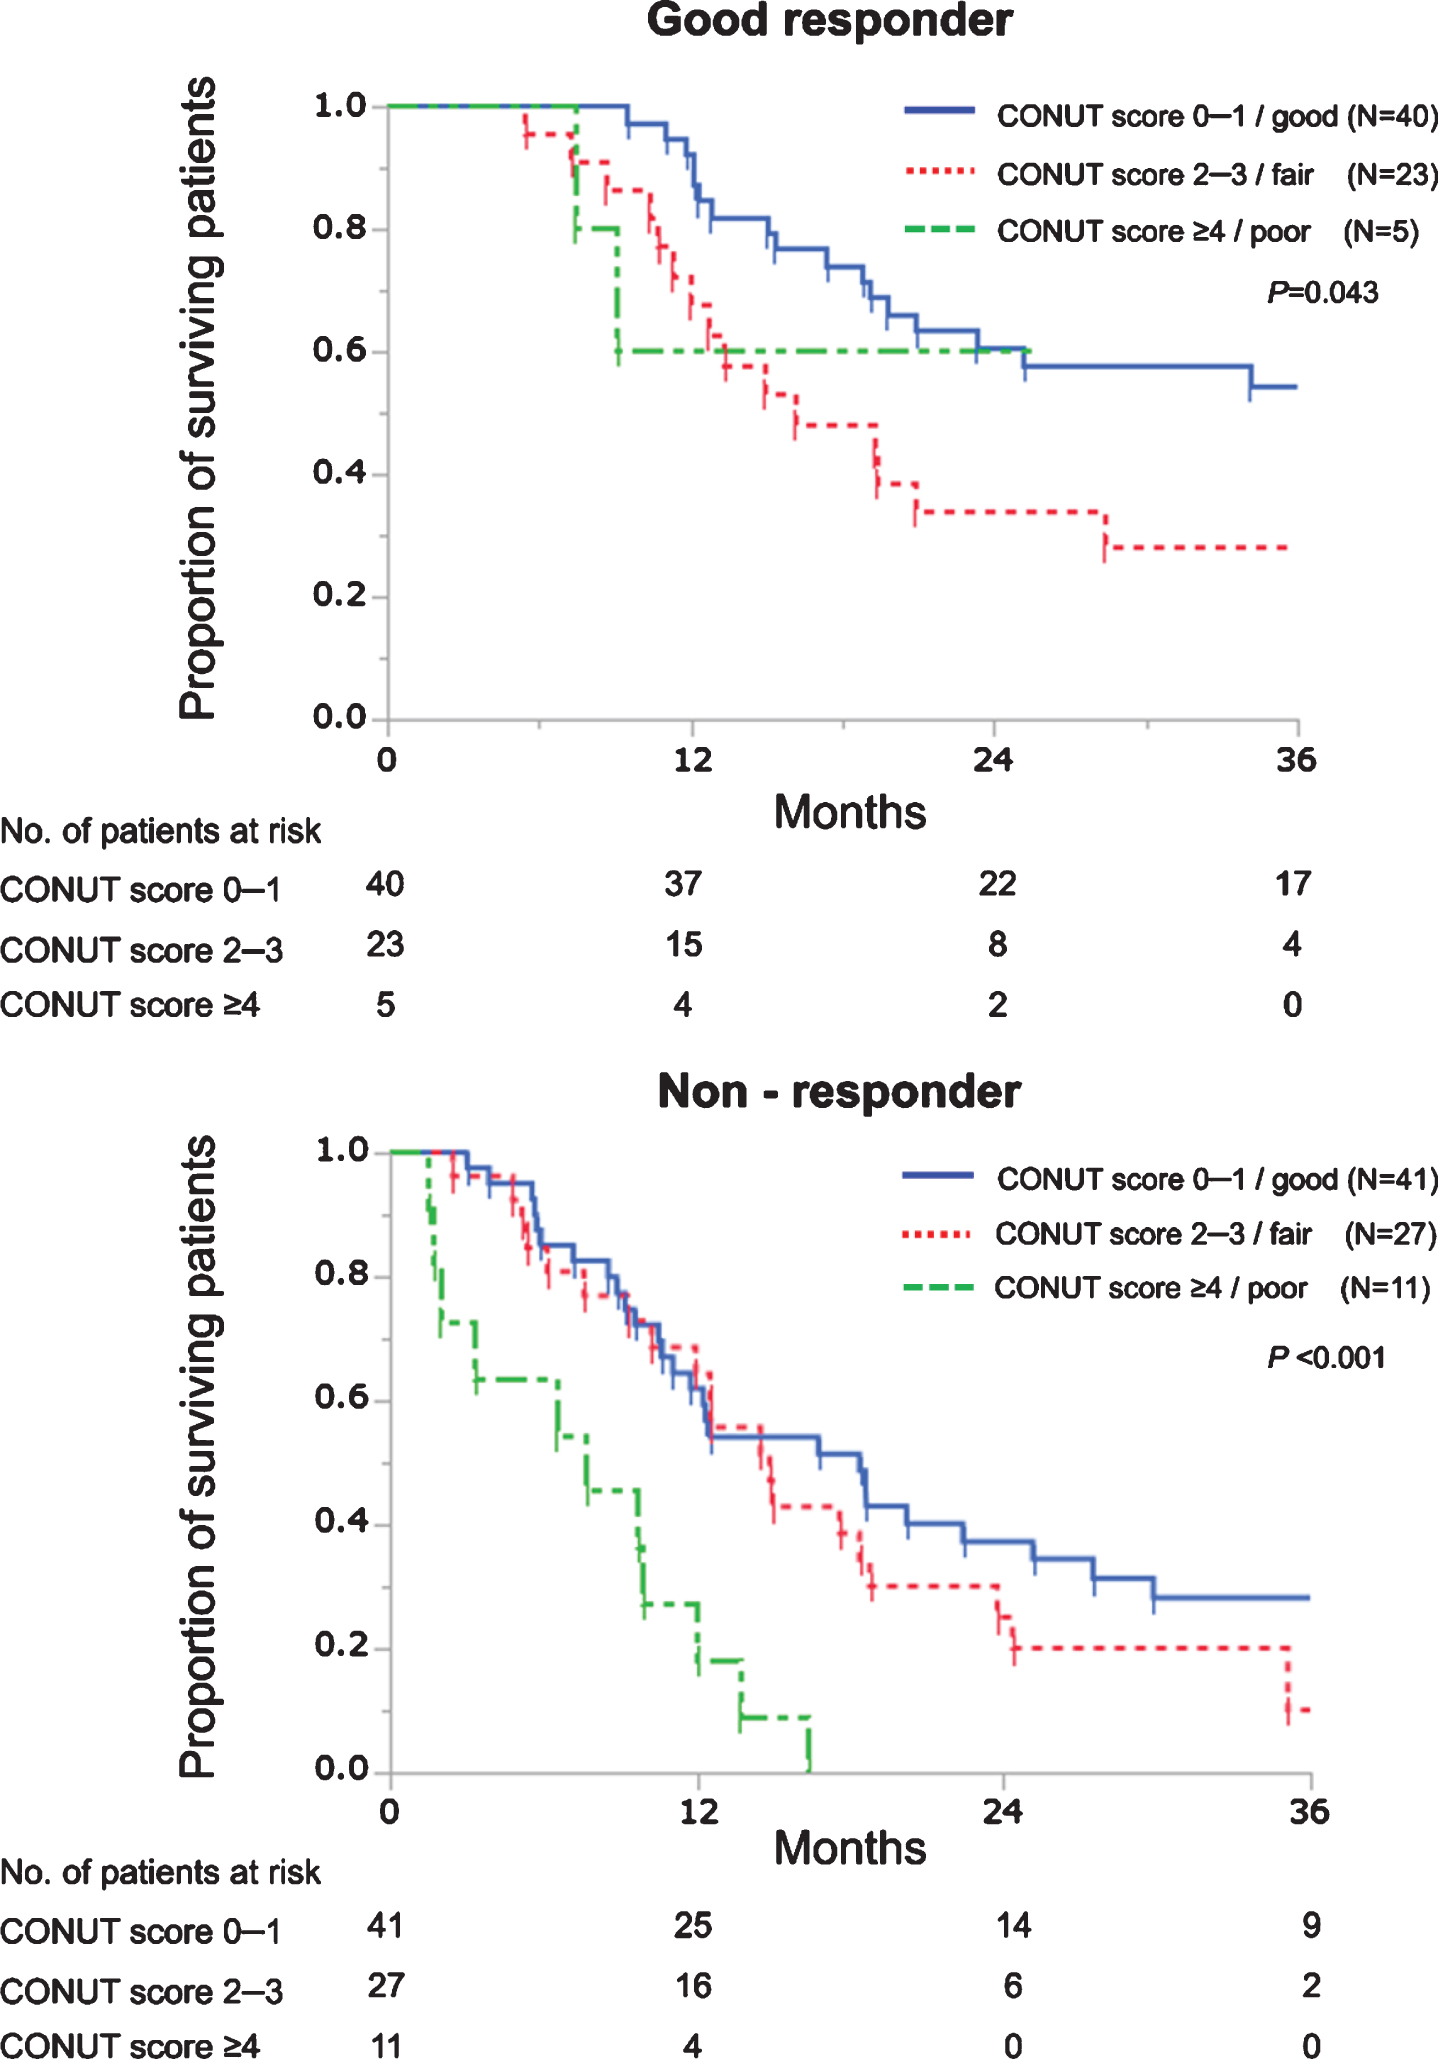 Kaplan–Meier curves estimate overall survival of patients with advanced urothelial carcinoma treated with first-line platinum-based chemotherapy according to the CONUT score in good responders and non-responders. In good responders, a univariable HR of patients with CONUT scores 0–1 was 0.49 (vs those with CONUT scores 2–3, P = 0.032). In non-responders, univariable HRs of patients with CONUT scores≥4 were 4.30 and 3.28 (vs those with CONUT scores 0–1, P < 0.001; and vs those with CONUT scores 2–3, P = 0.004, respectively).